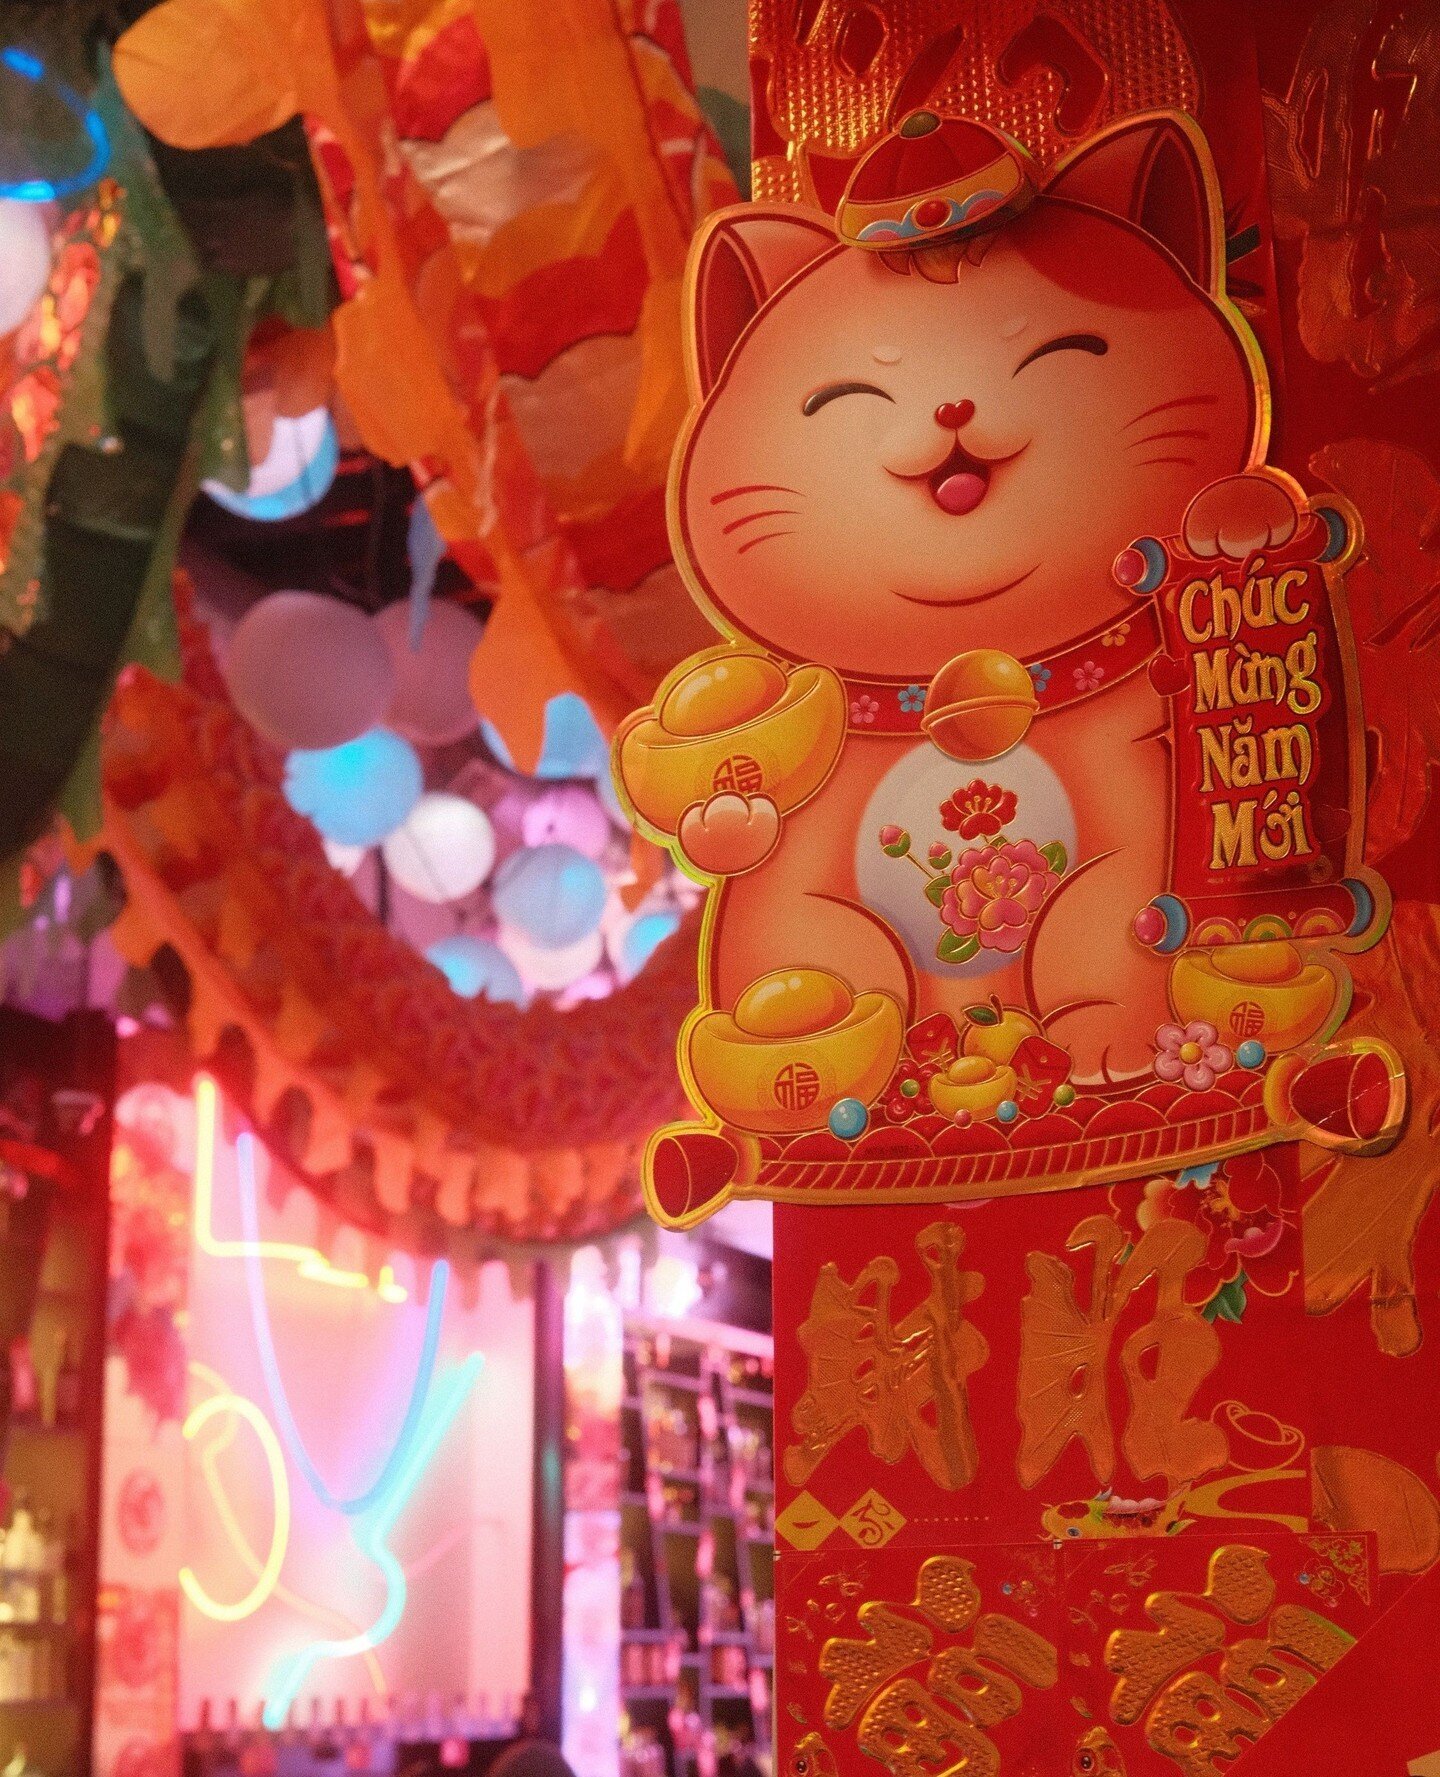 We had so much fun putting up these decorations for Red Envelope, and watching it all come together has been mind-blowing. Watching people's faces light up when they walk into Viridian is one of the best parts of our Lunar New Year pop-up, and it giv